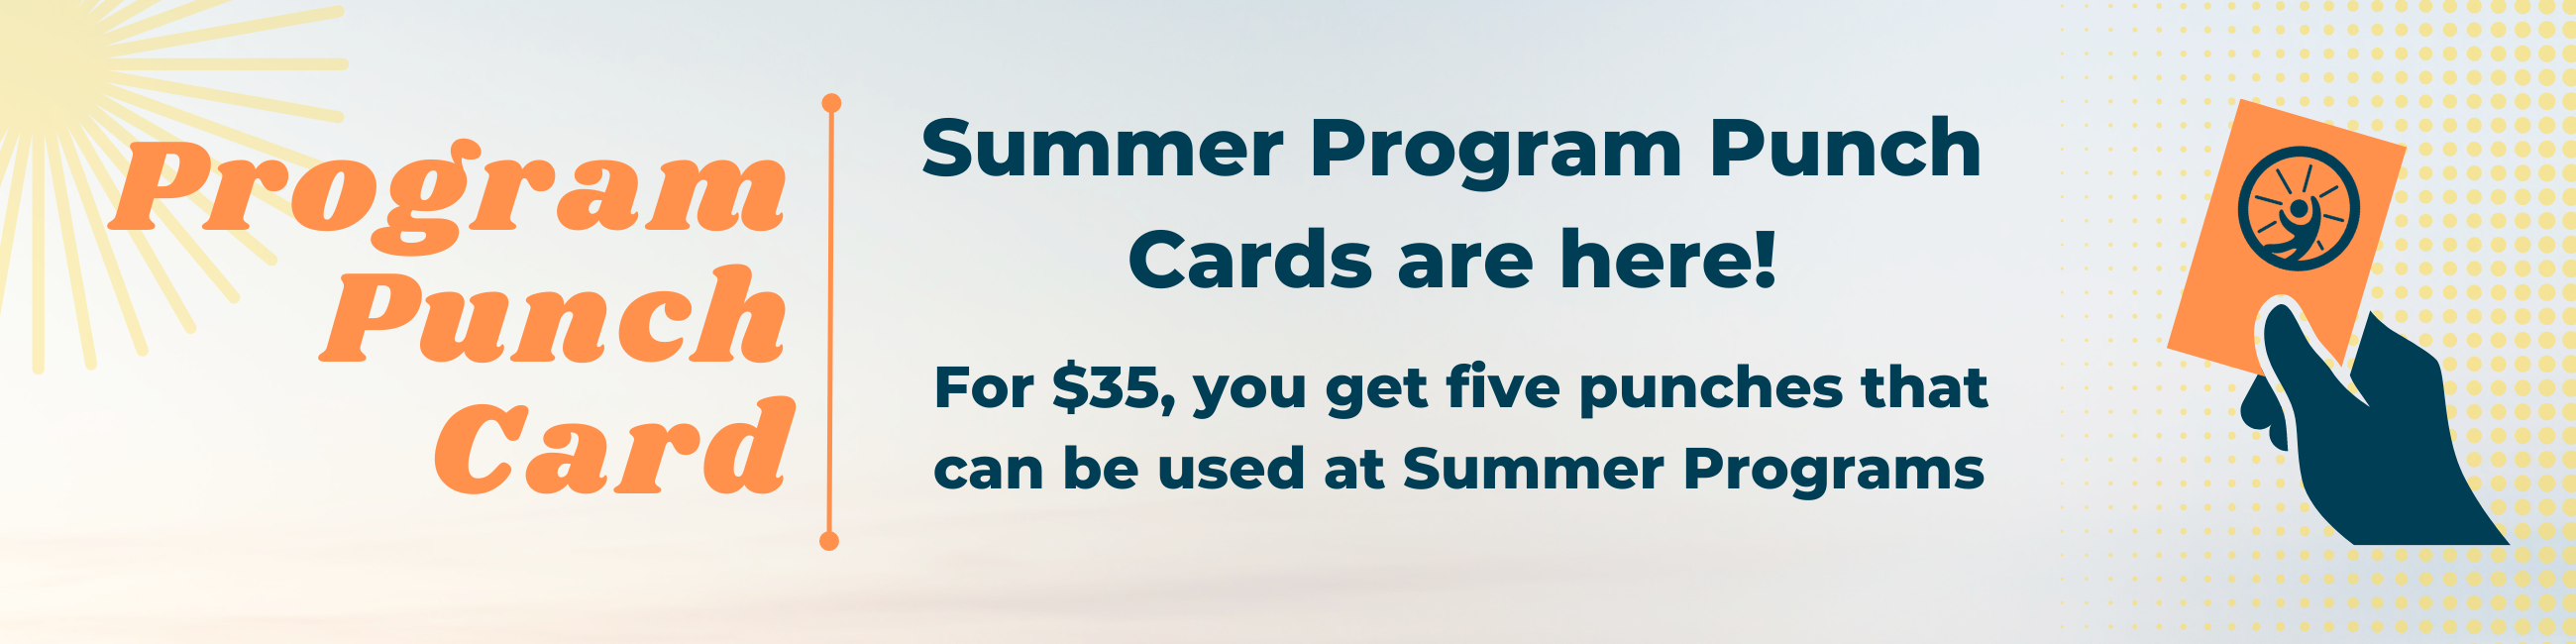 Program Punch Card. For 35 dollars, you get five punches to use at programs.